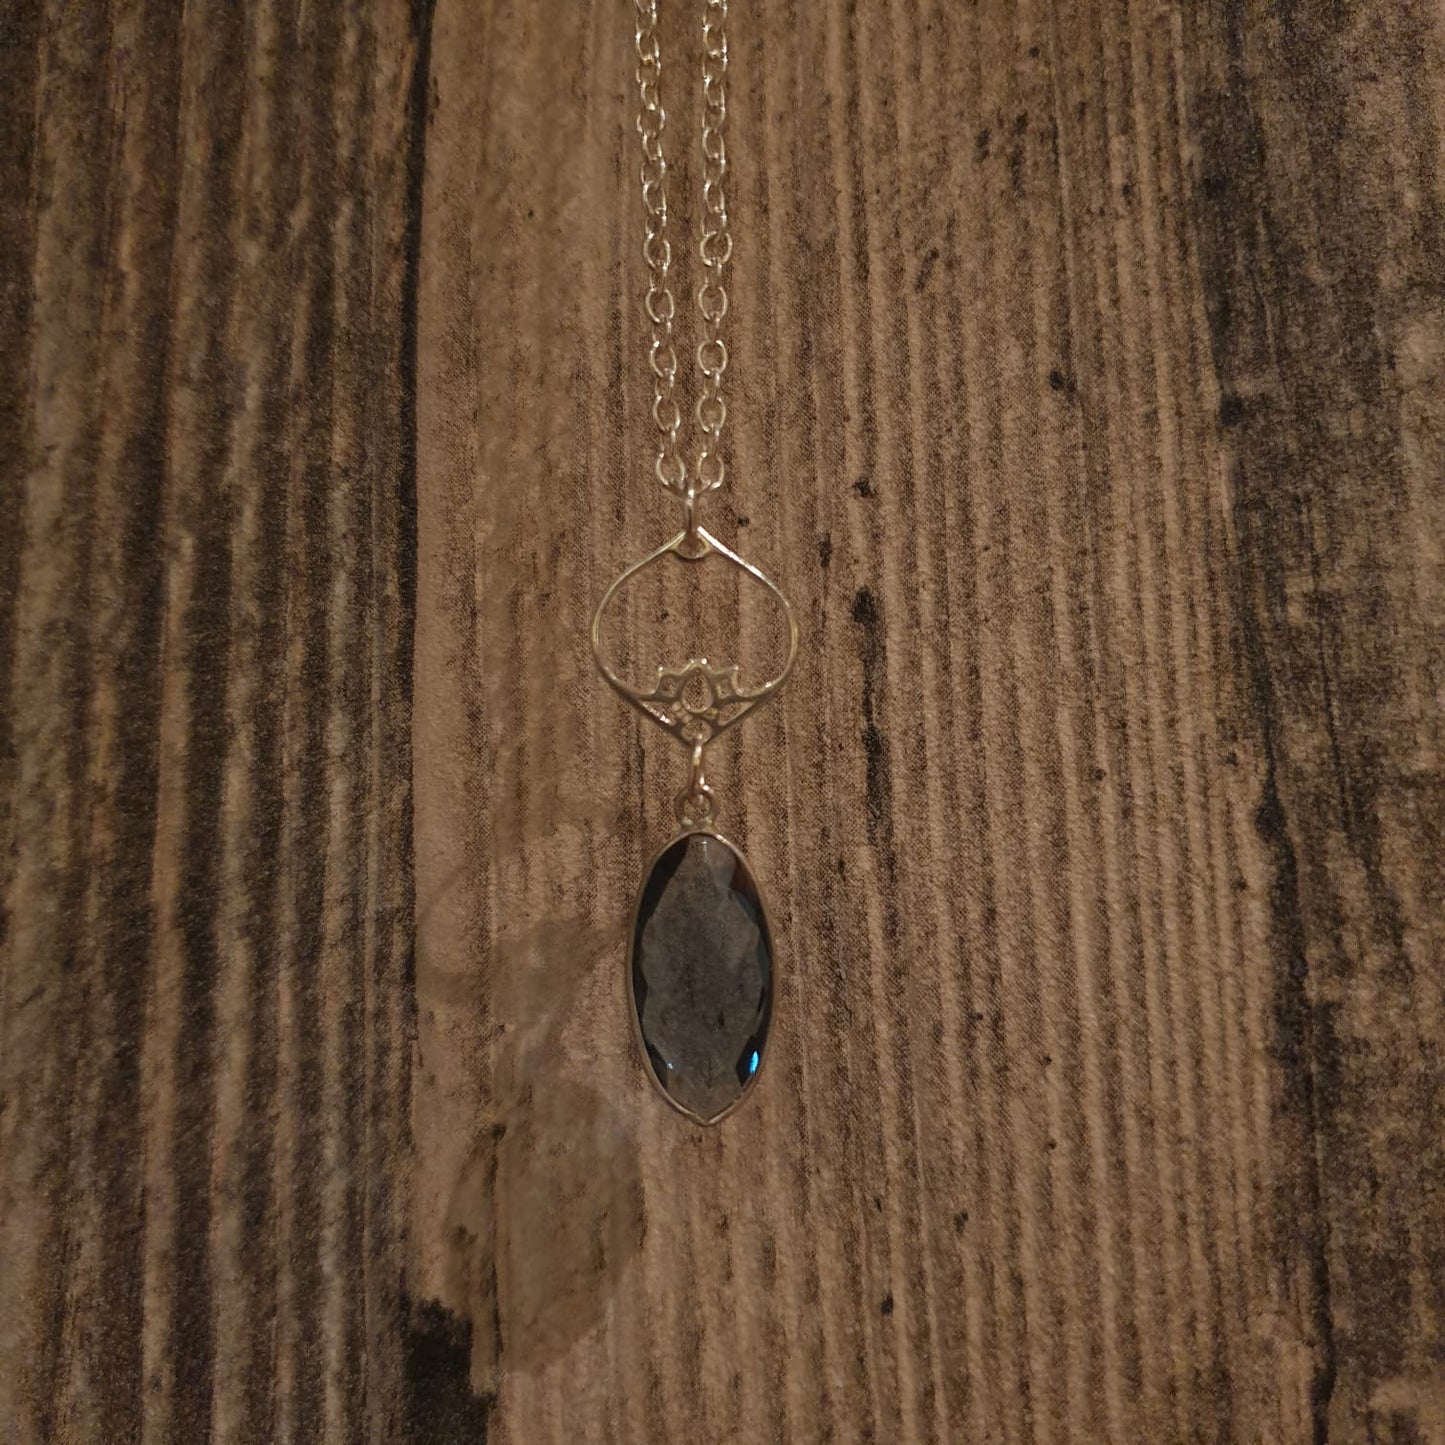 Kyanite Long Oval Pendant & 925 Lotus Connector Necklace - AN216 - The Hare and the Moon